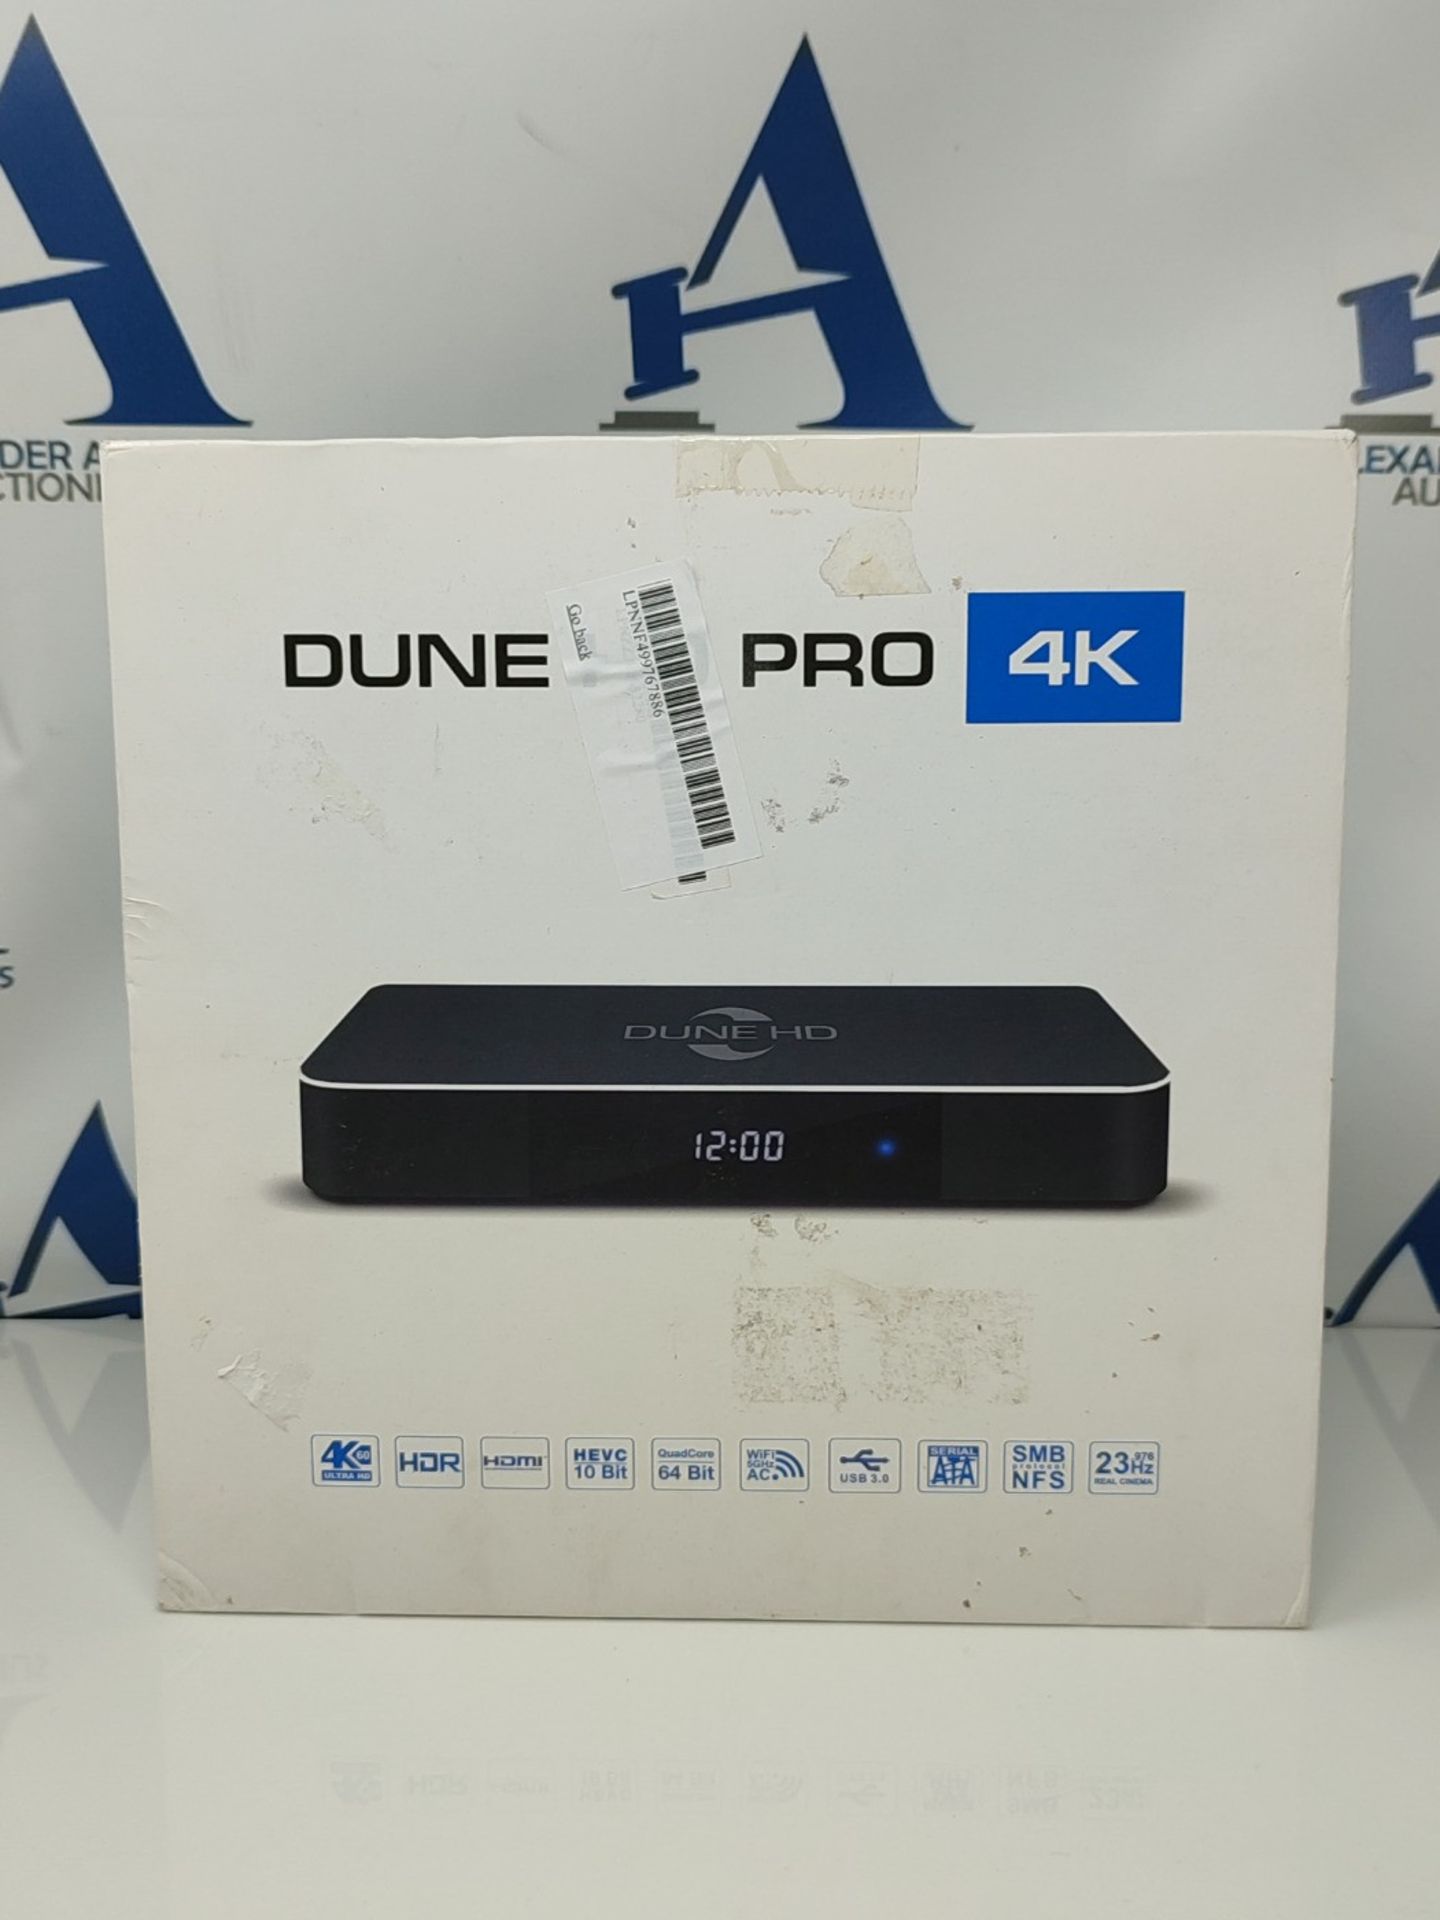 RRP £199.00 Dune HD Pro 4K Multimedia Player (4Kp60, HDR, BT.2020, HDMI 2.0a)-Black - Image 2 of 3